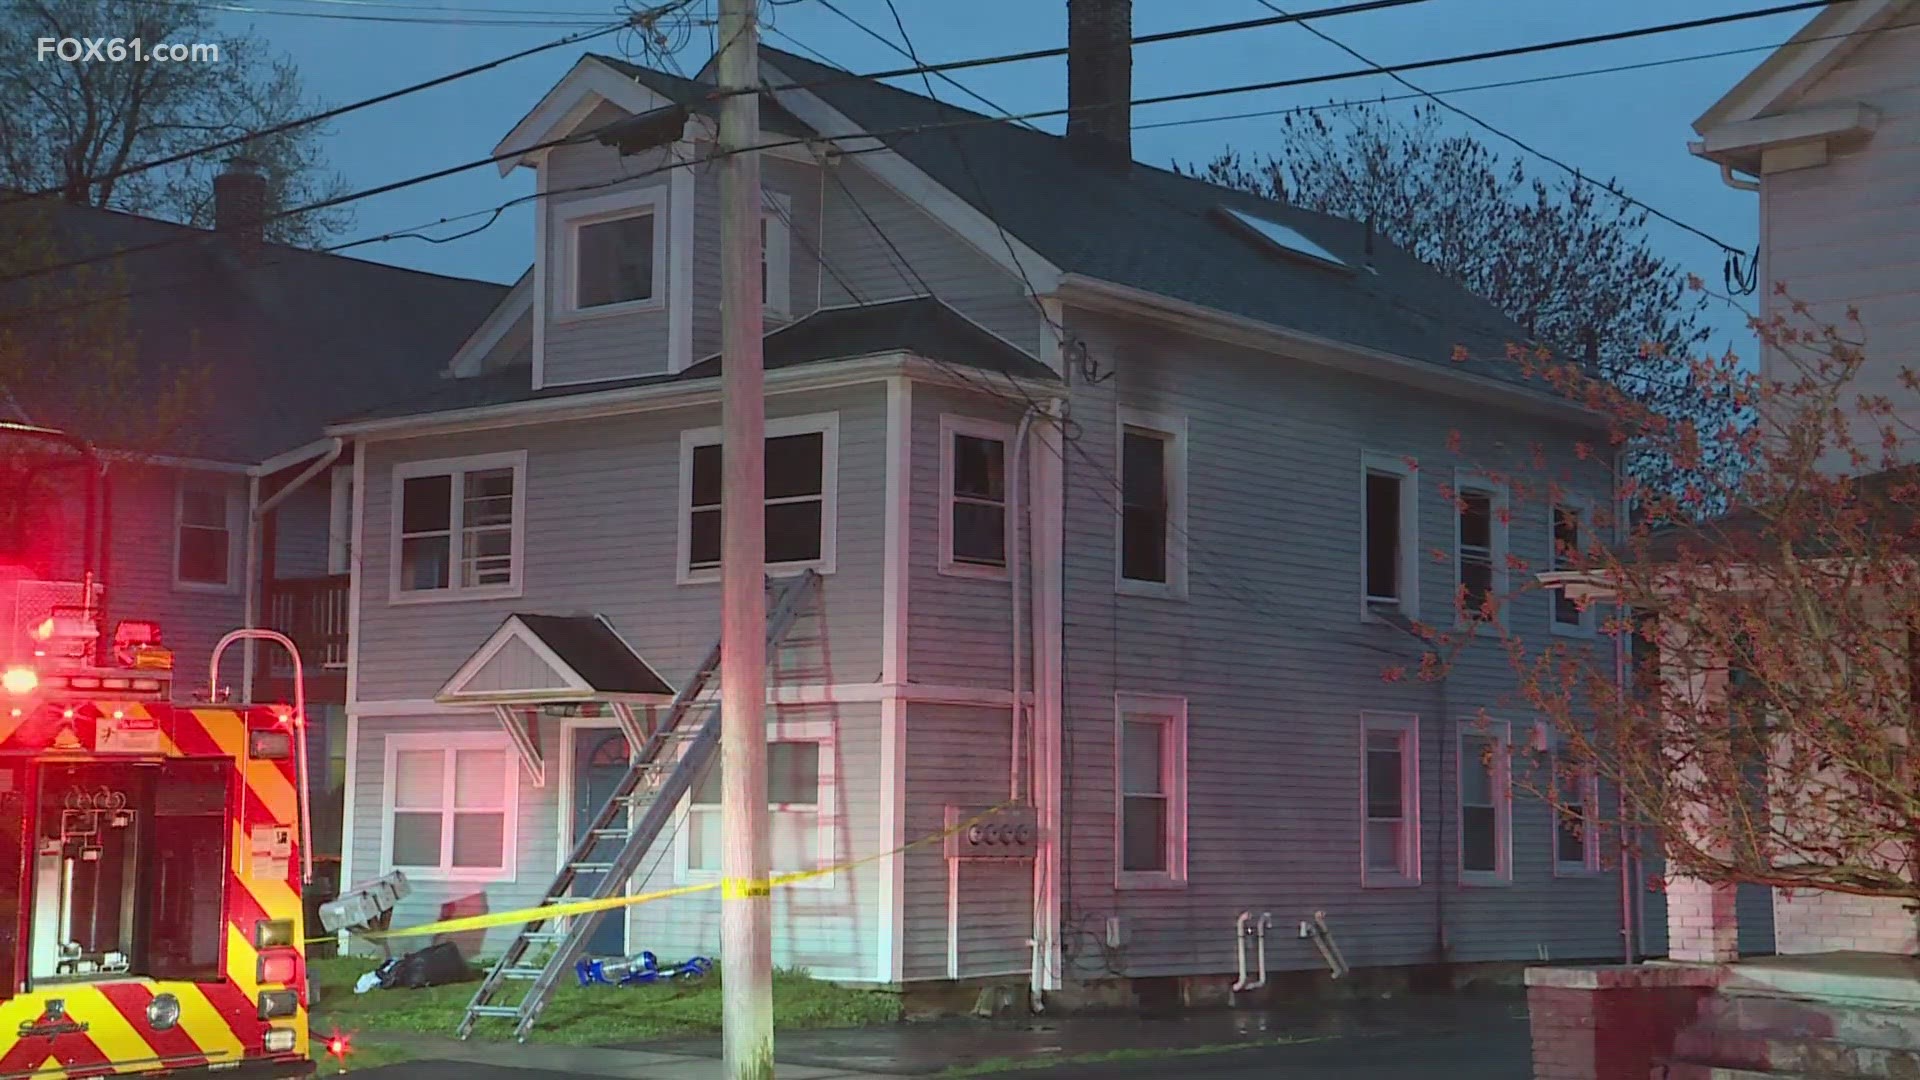 A deadly fire that killed two people on Wednesday in Wallingford is now being criminally investigated.